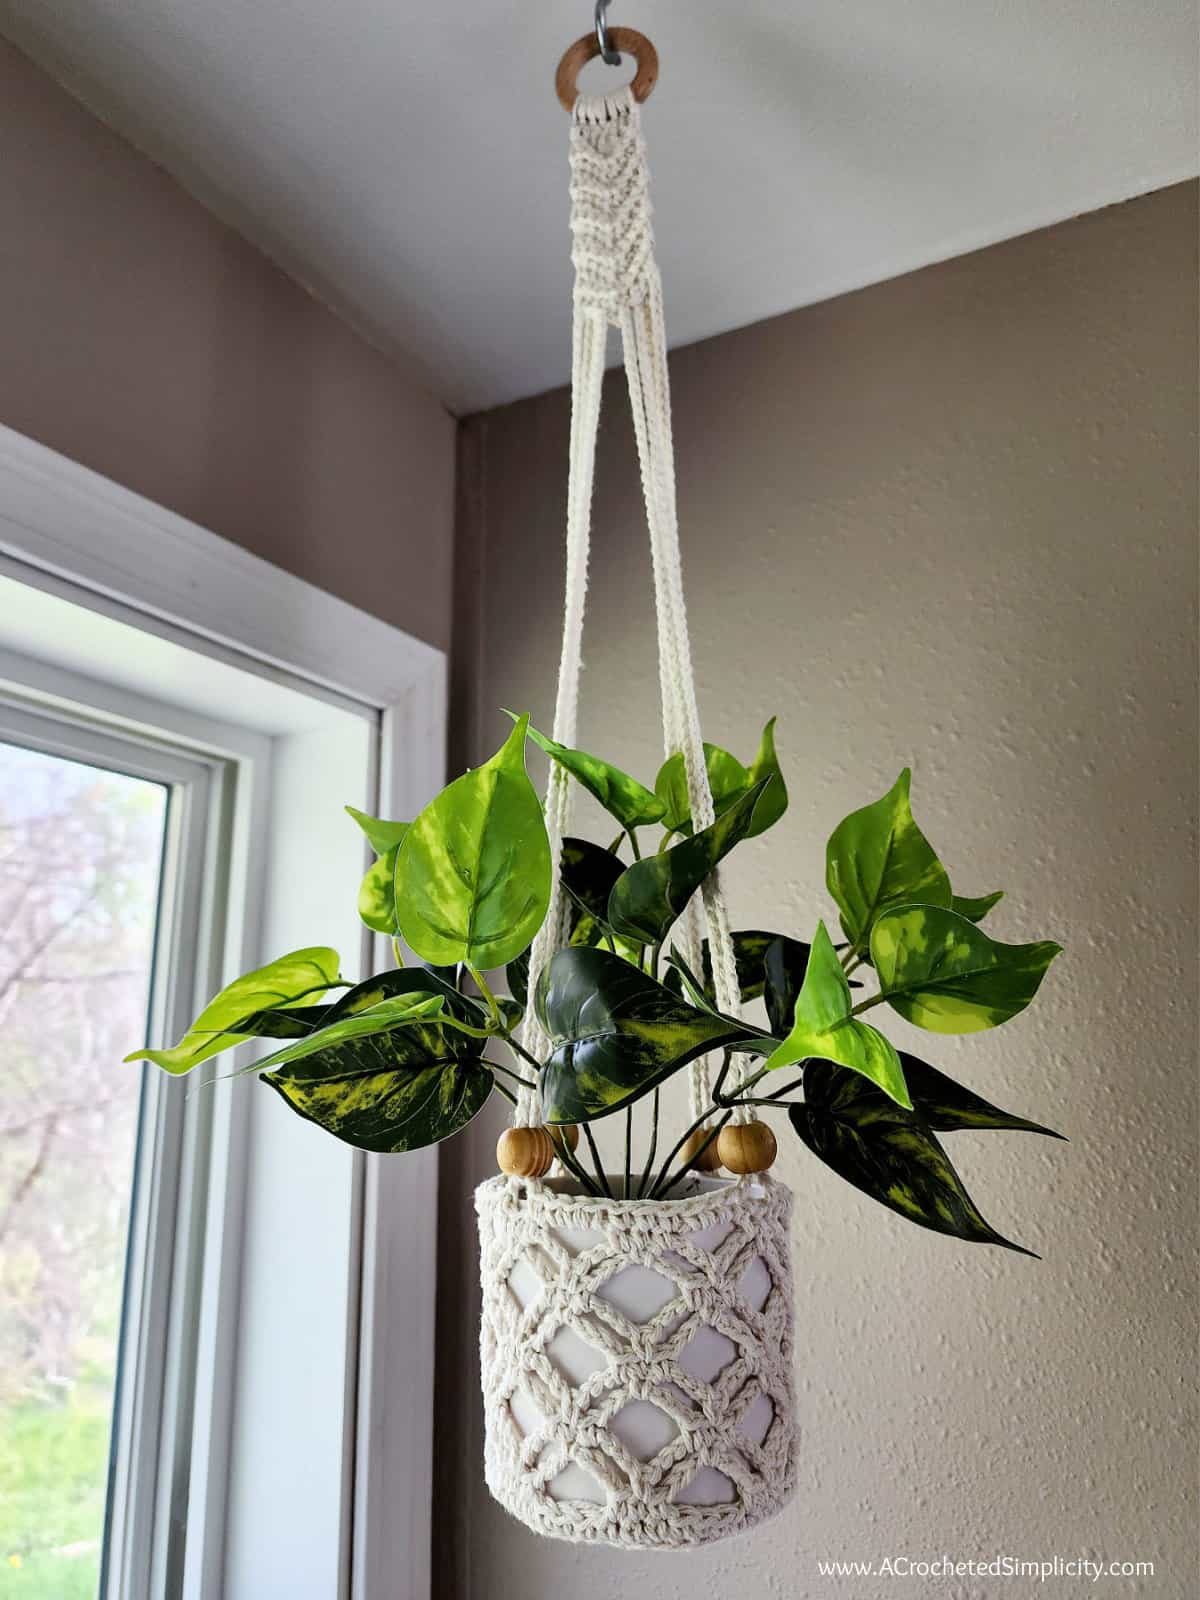 Small ecru crochet plant hanger in window holding potted plant.